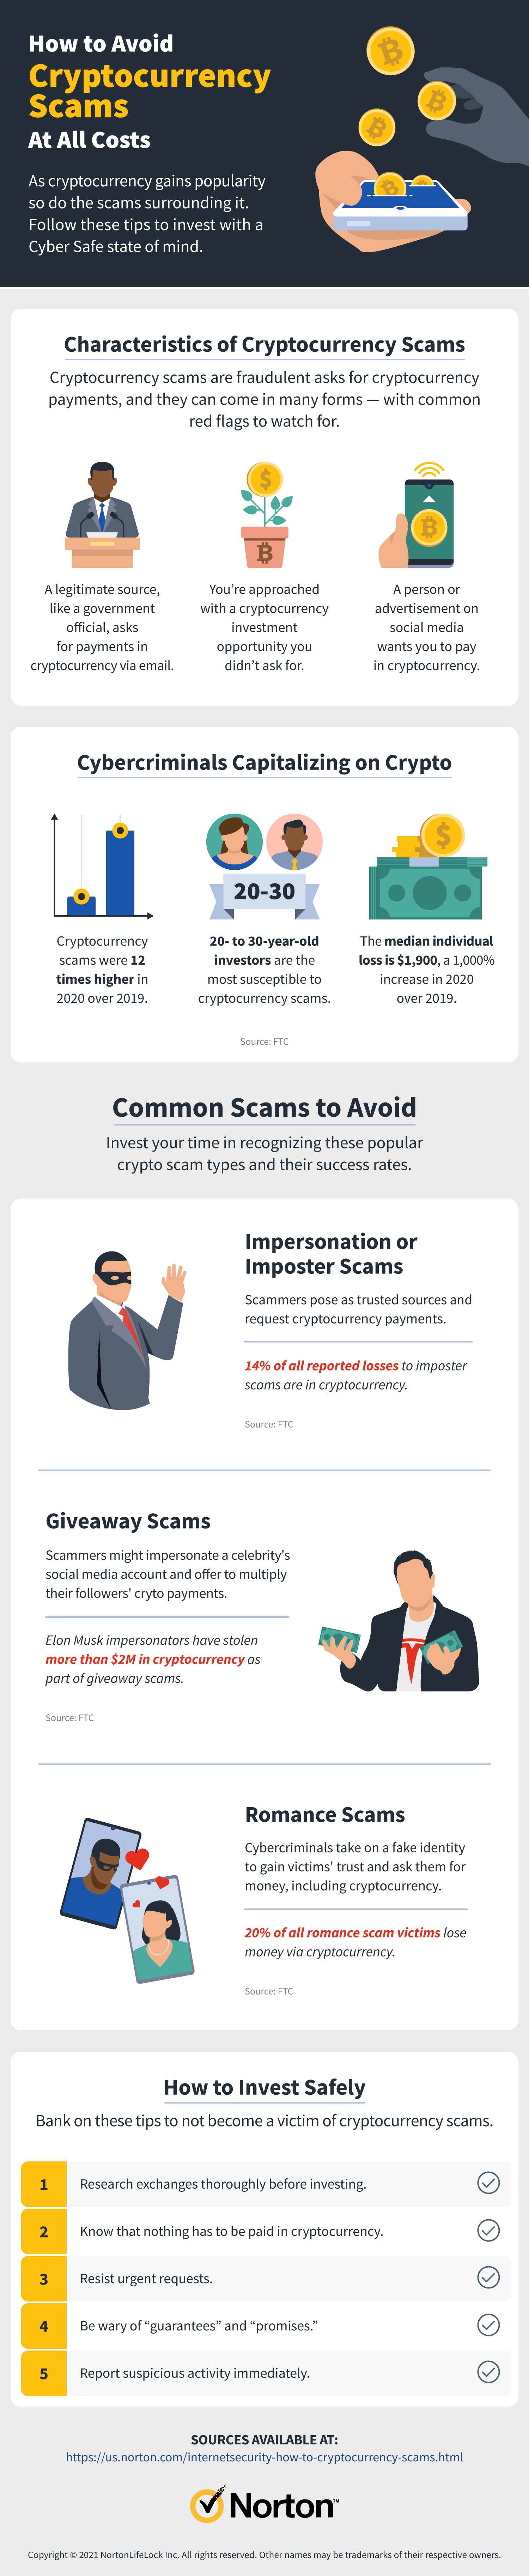 an infographic overviews what are cryptocurrency scams and how to avoid them, plus common crypto scam red flags to watch for